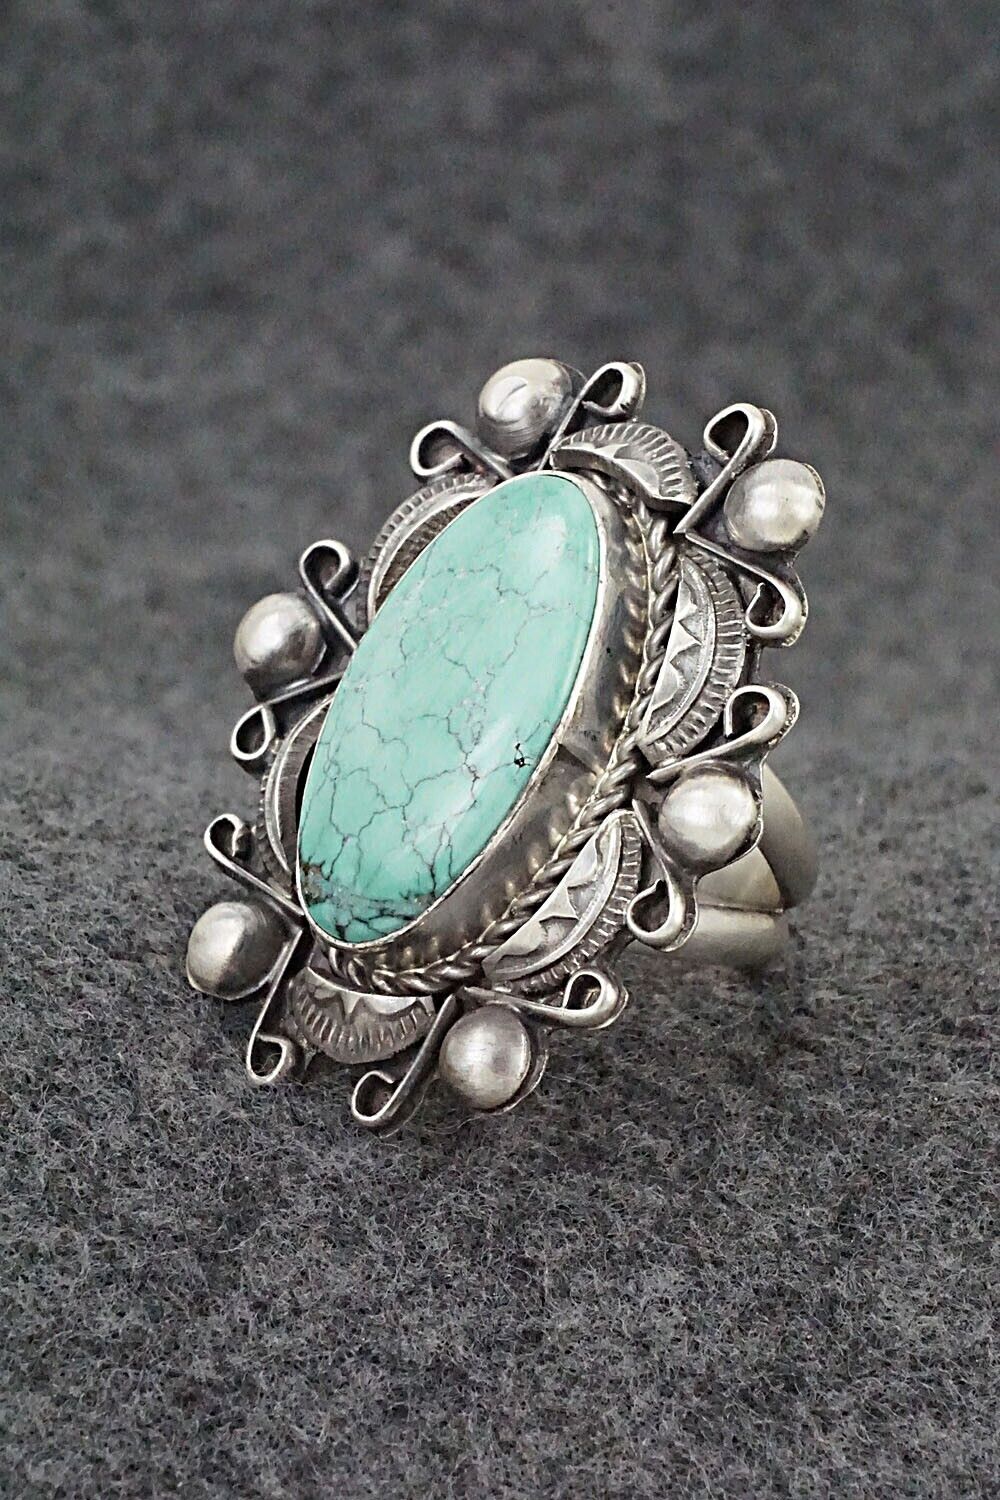 Turquoise & Sterling Silver Ring - Wilson Dawes - Size 9